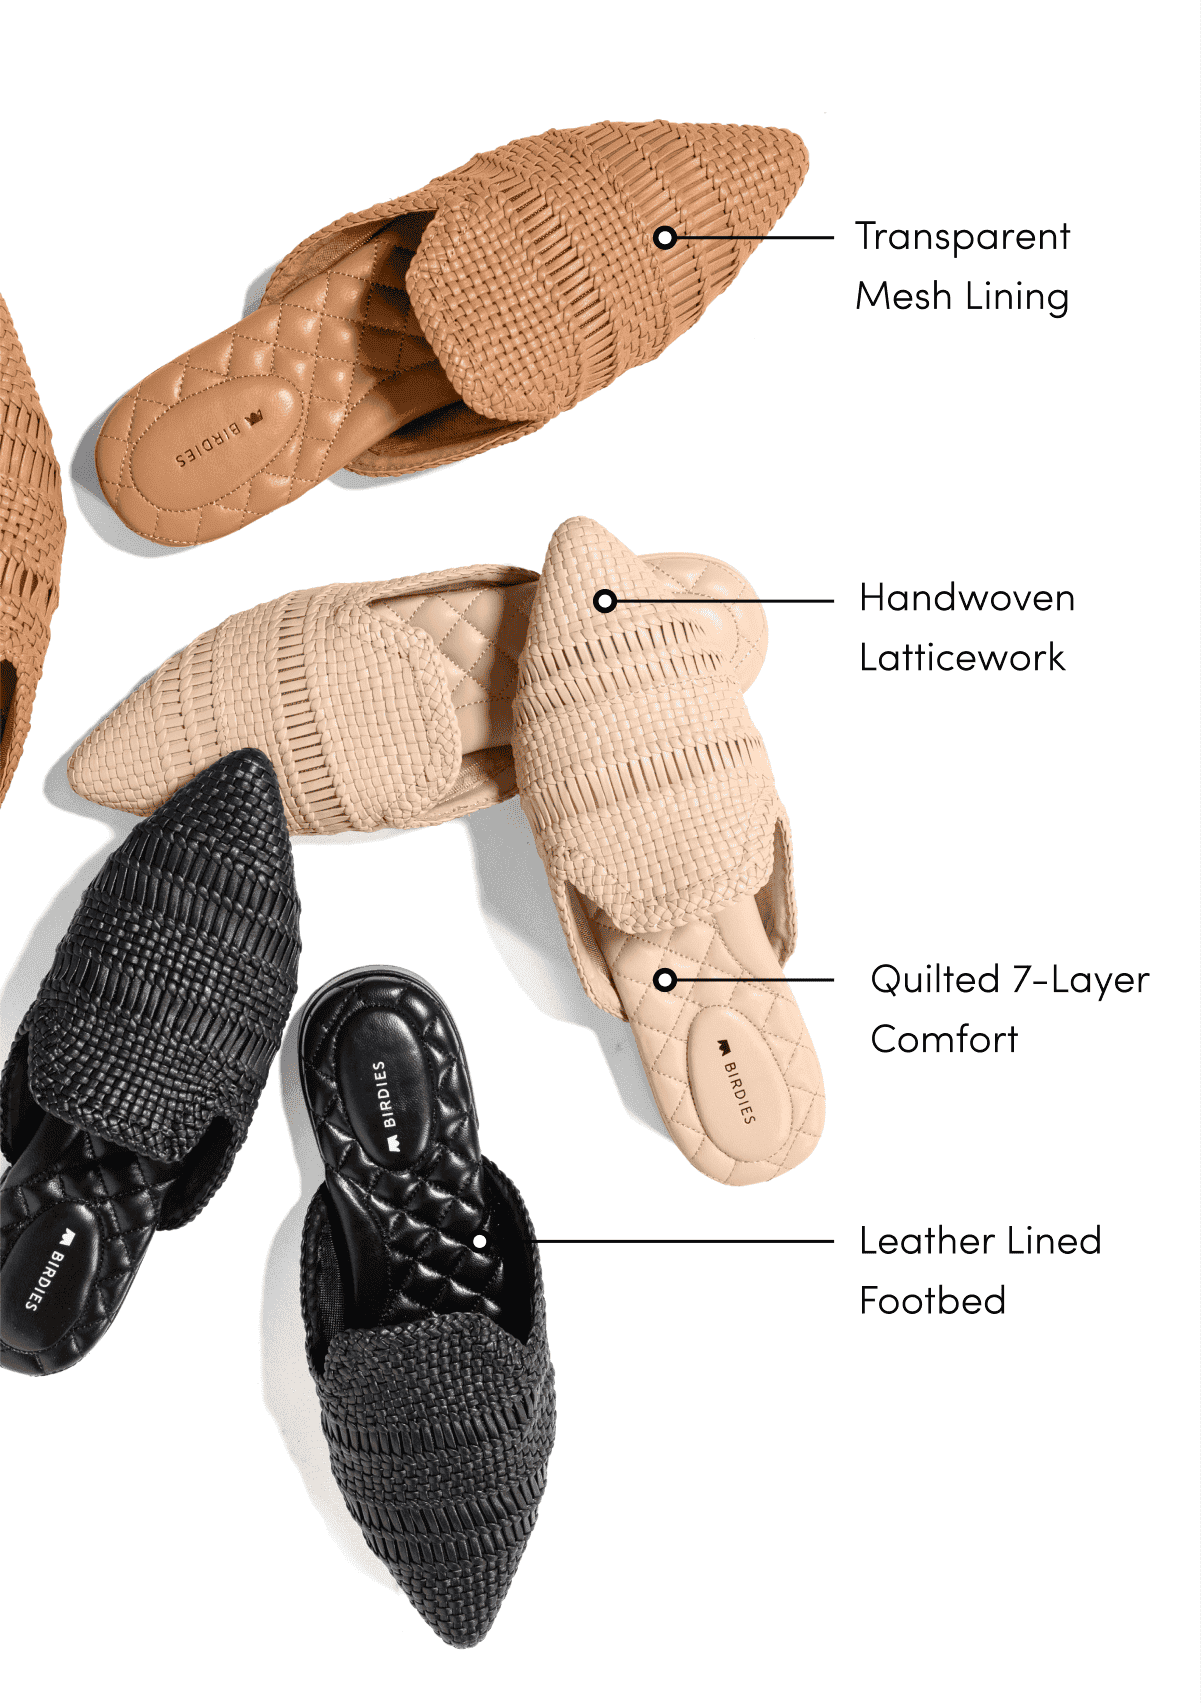 A deep dive into what makes the Dove mule special - Transparent mesh lining; Handwoven latticework; Quilted 7-layer comfort; Leather lined footbed.